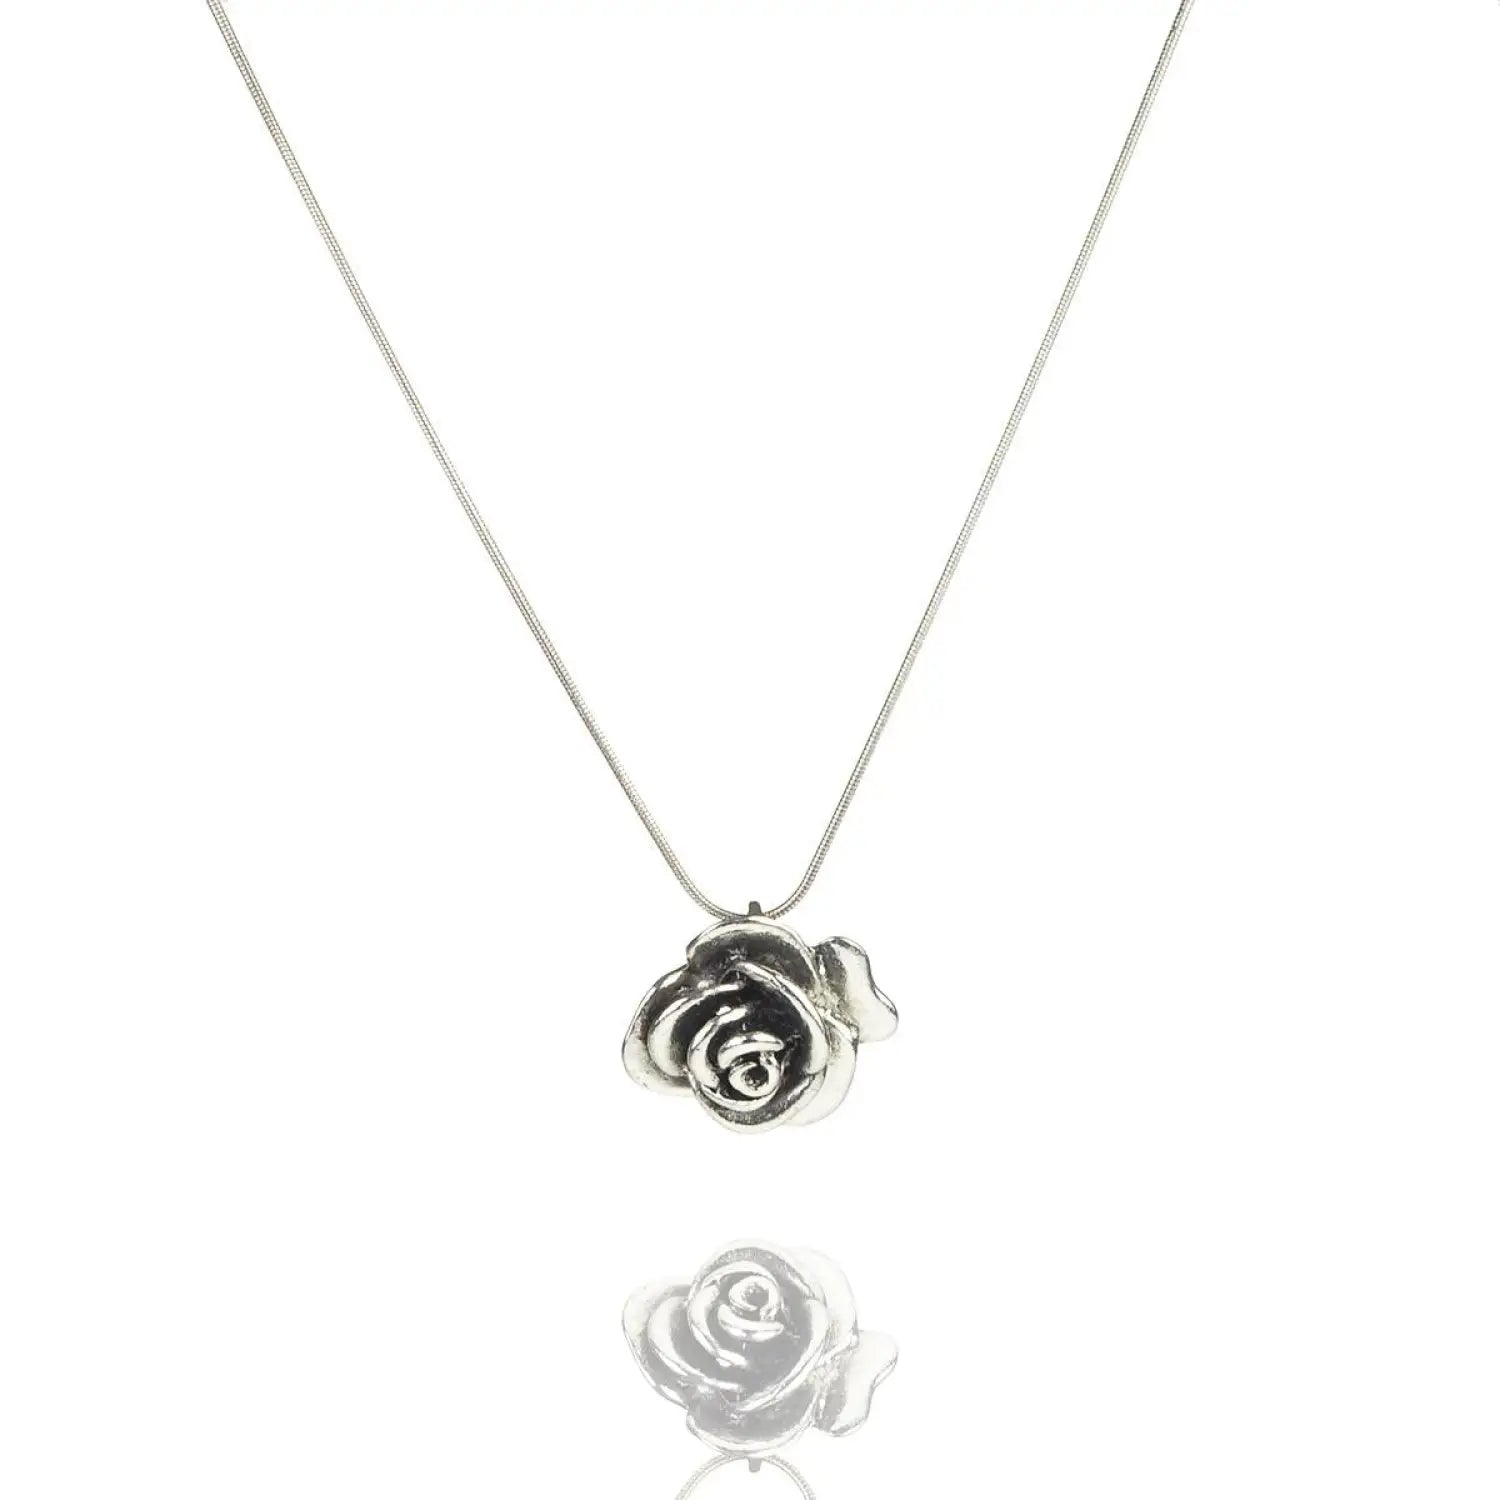 Antique silver rose pendant statement necklace with rose pendant displayed.